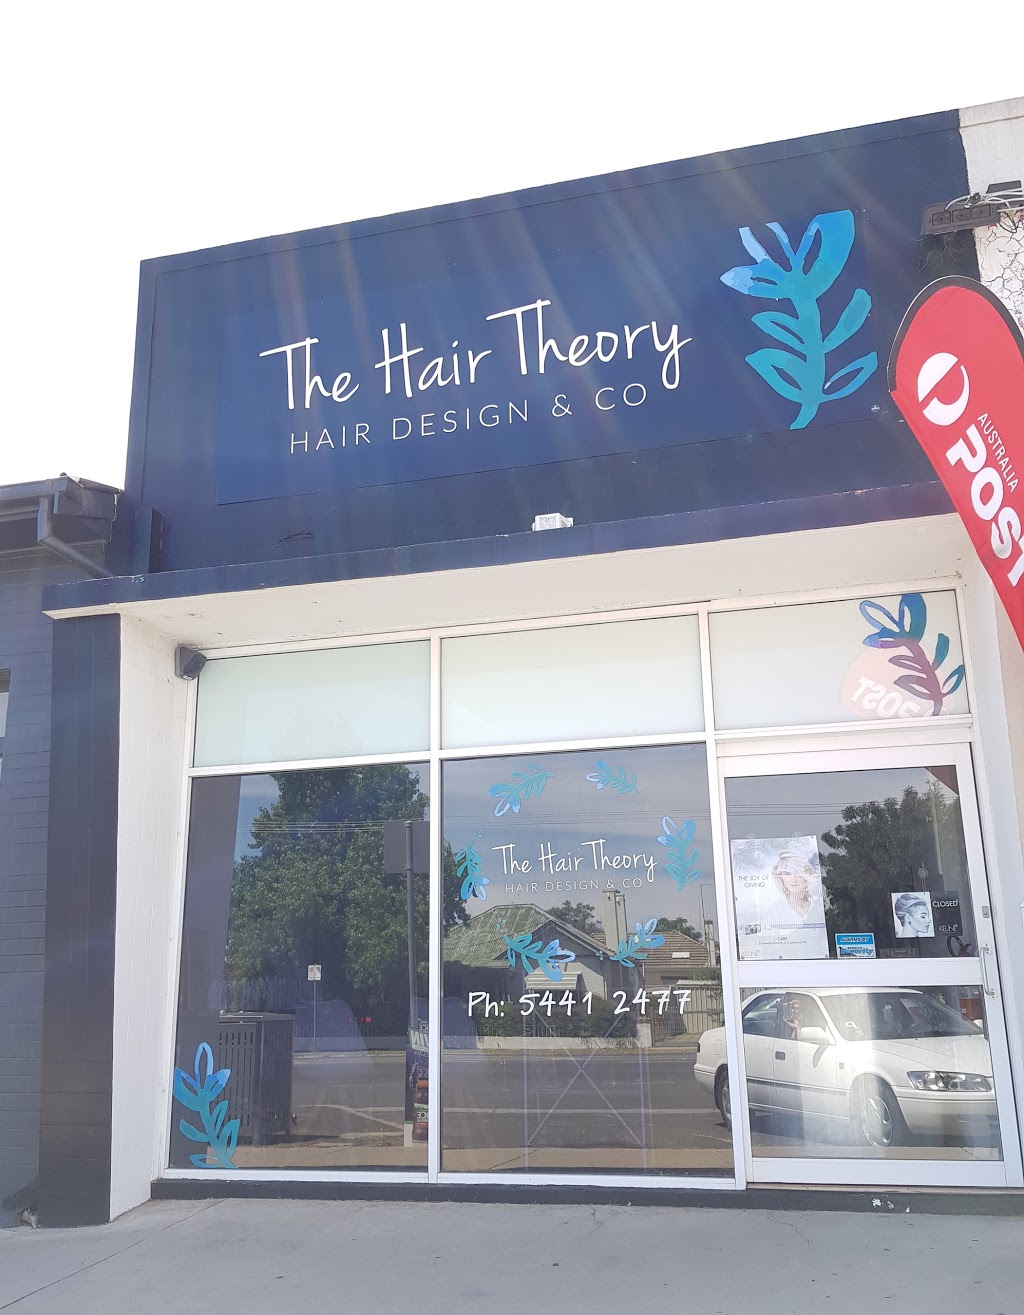 The Hair Theory | hair care | 33 Somerville St, Flora Hill VIC 3550, Australia | 54412477 OR +61 54412477